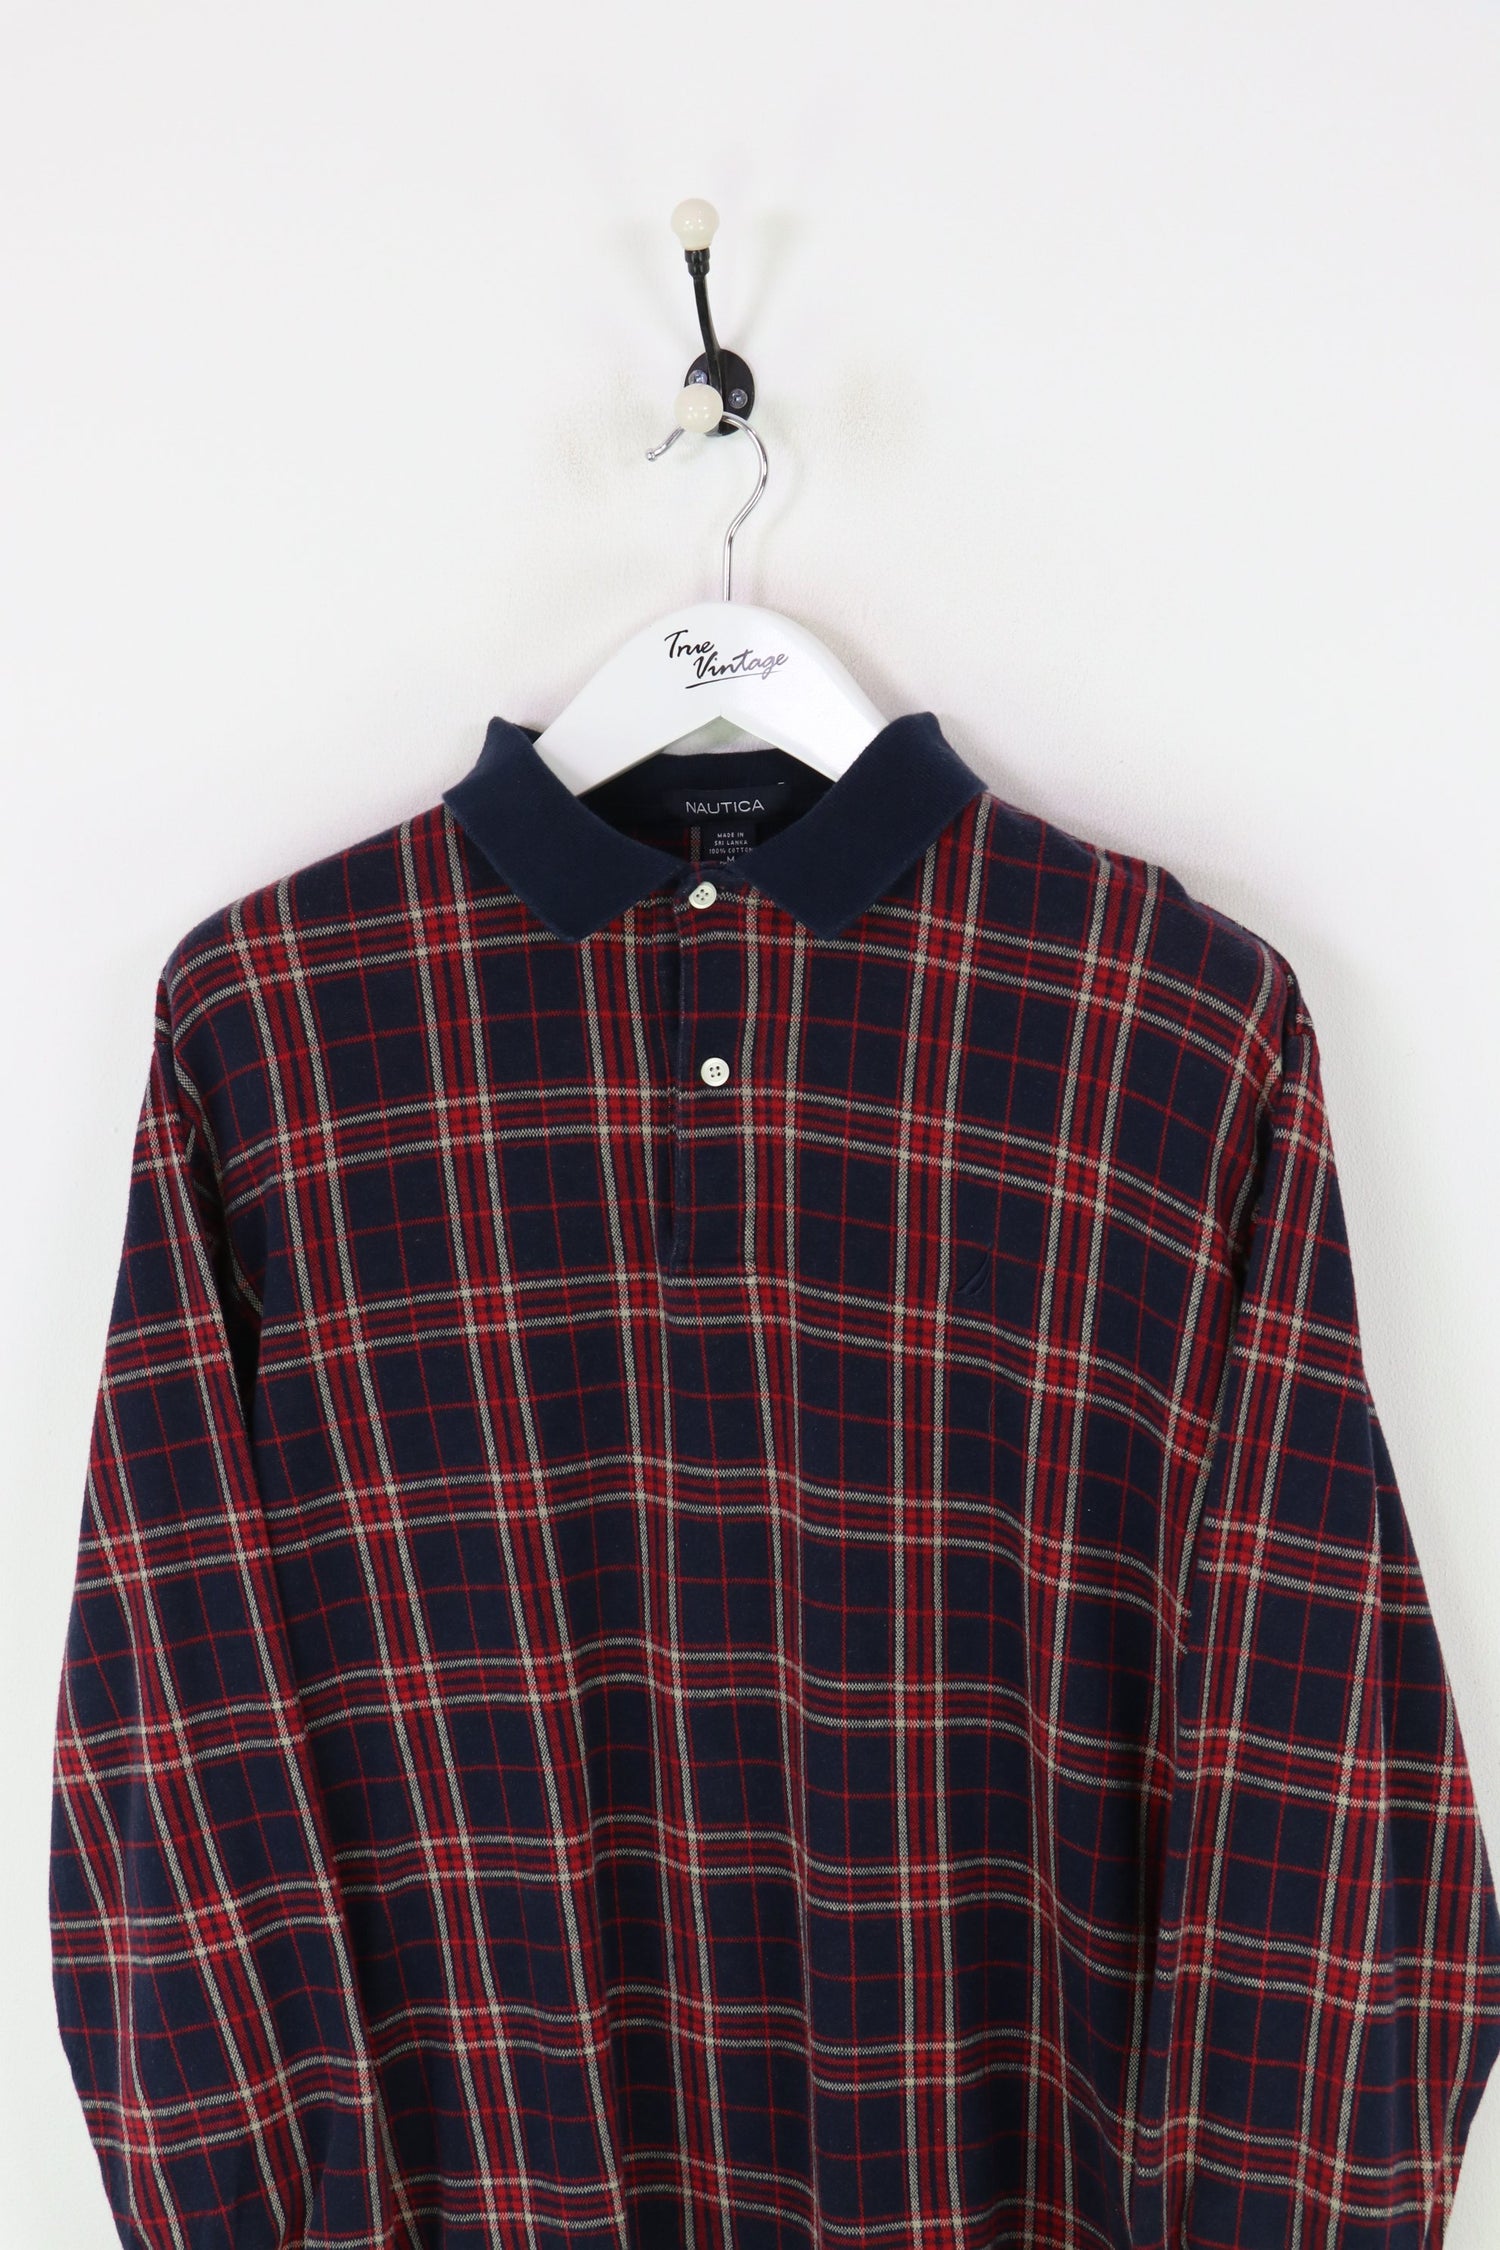 Nautica L/S Polo Shirt Navy/Red Small